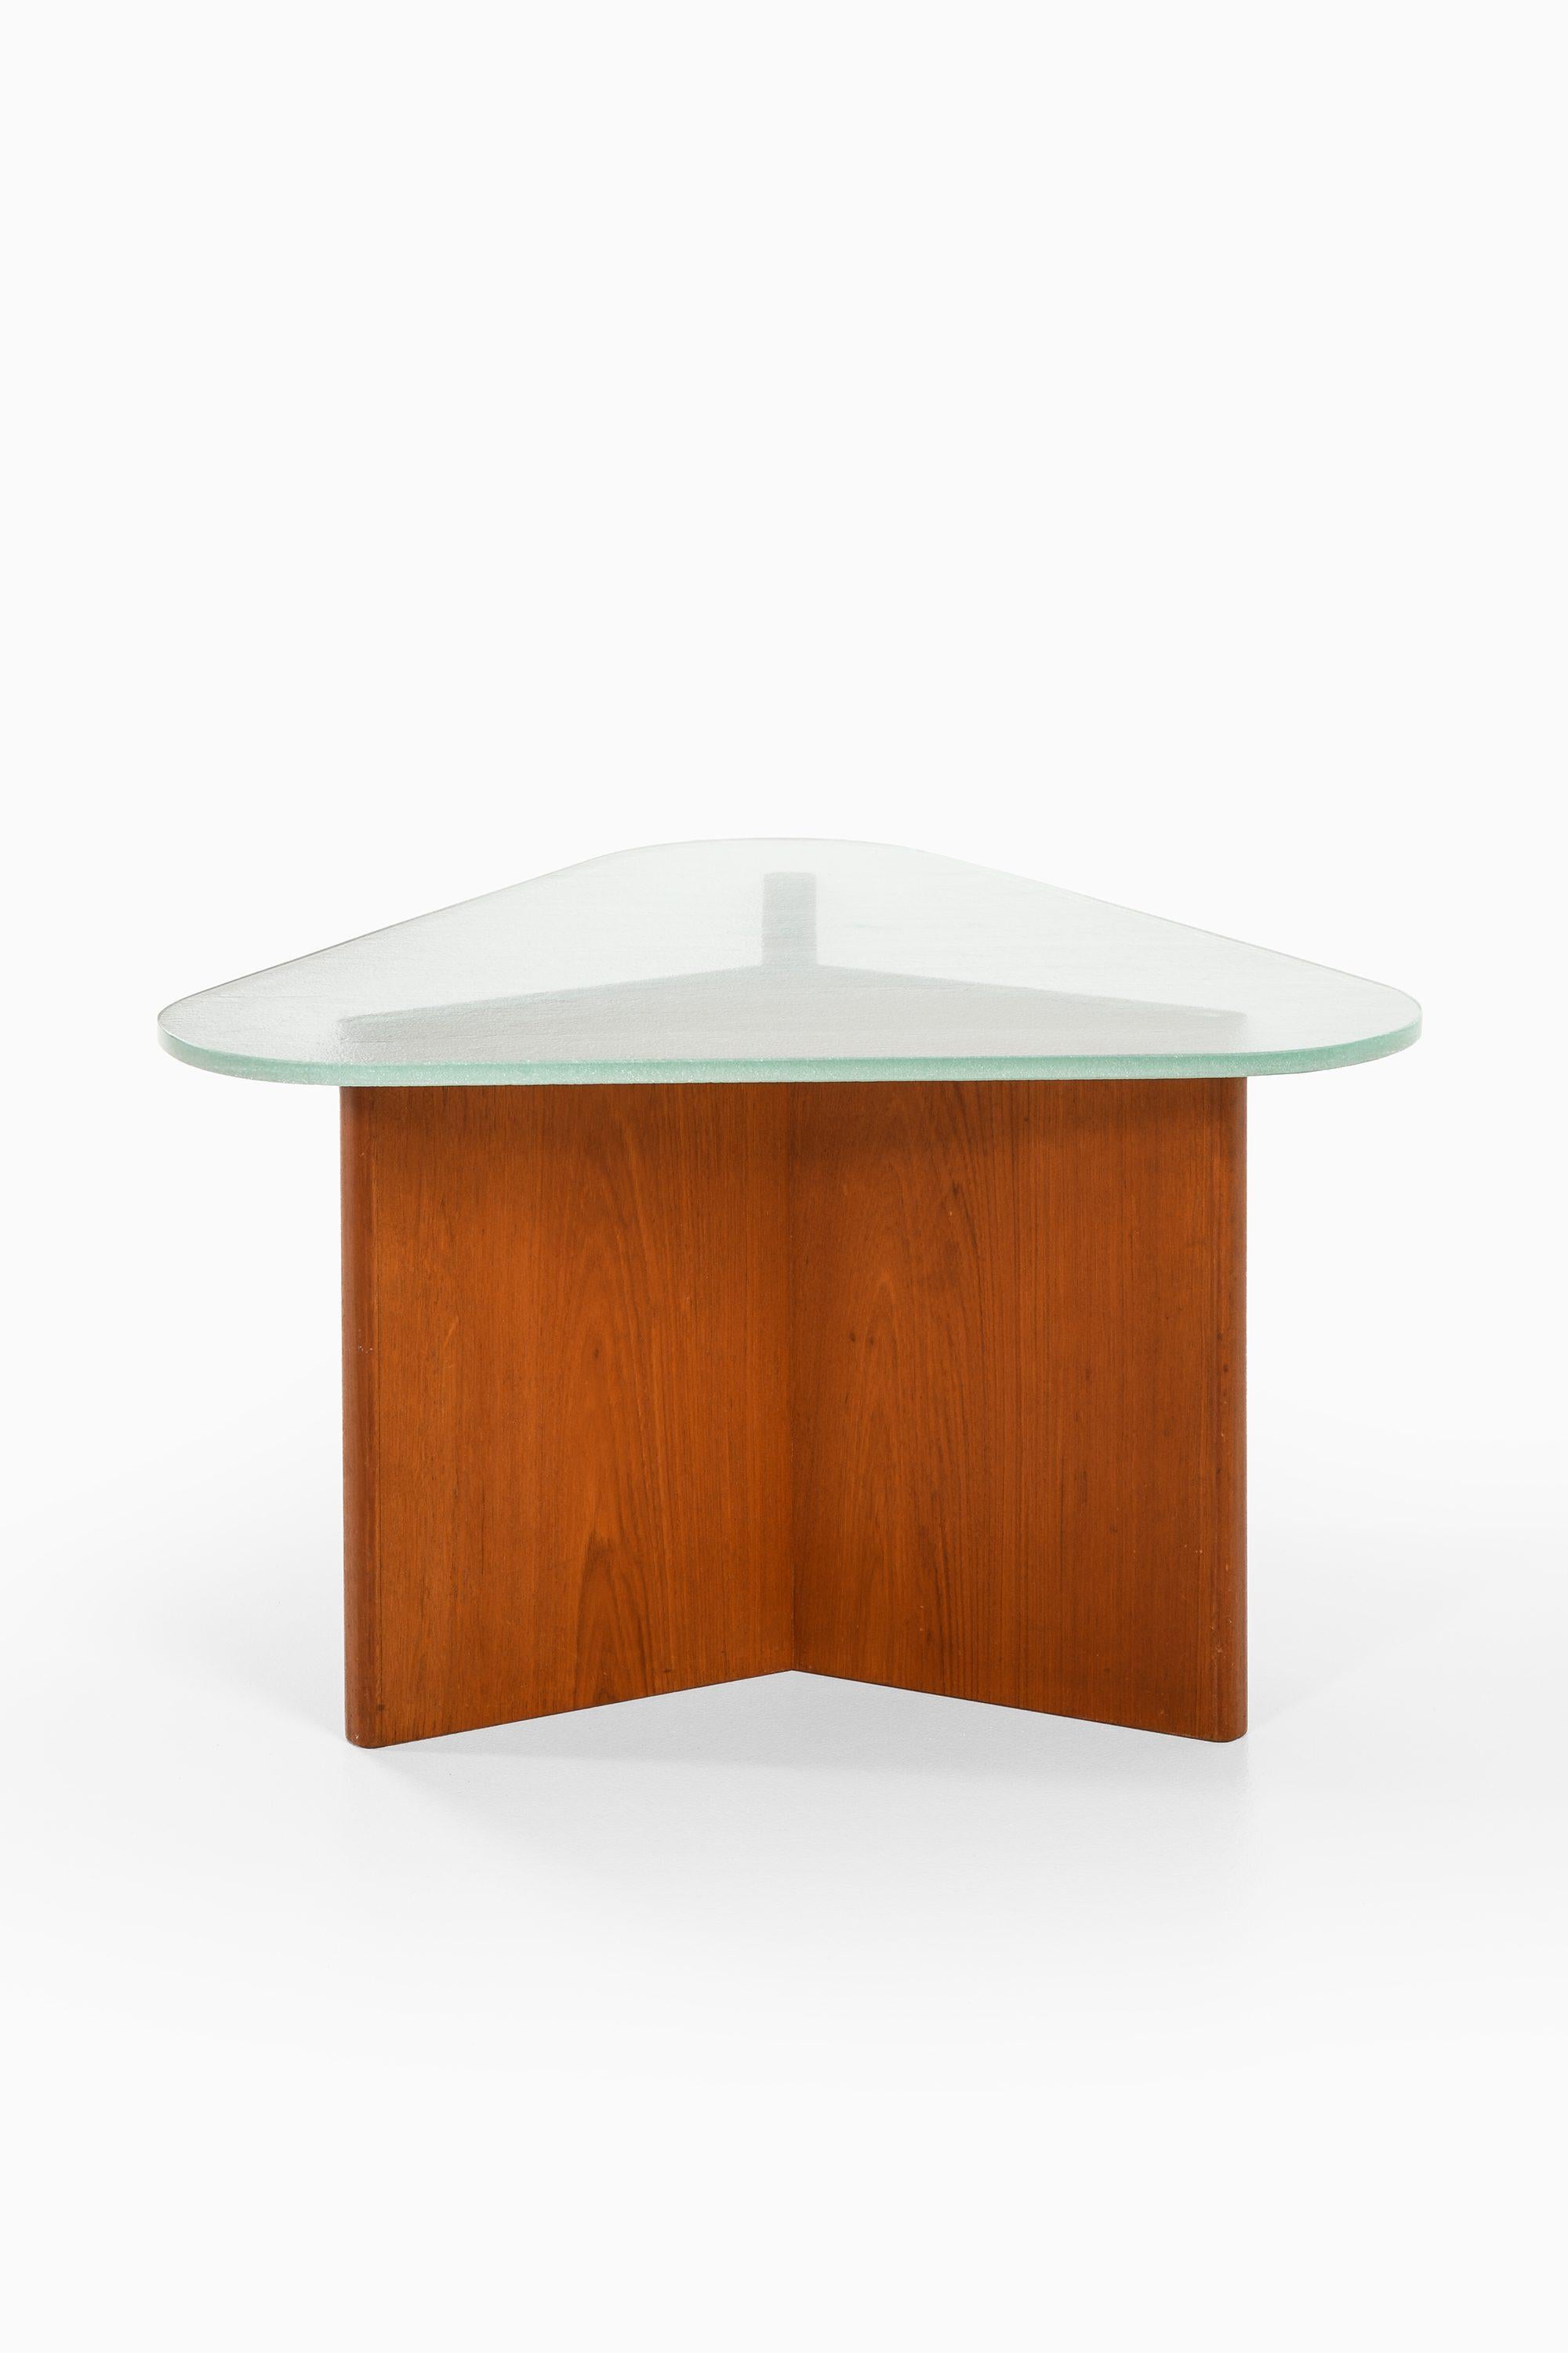 Scandinavian Modern Triangular Coffee Table in Elm and Raw Glass Top by Axel Einar Hjorth, 1940's For Sale